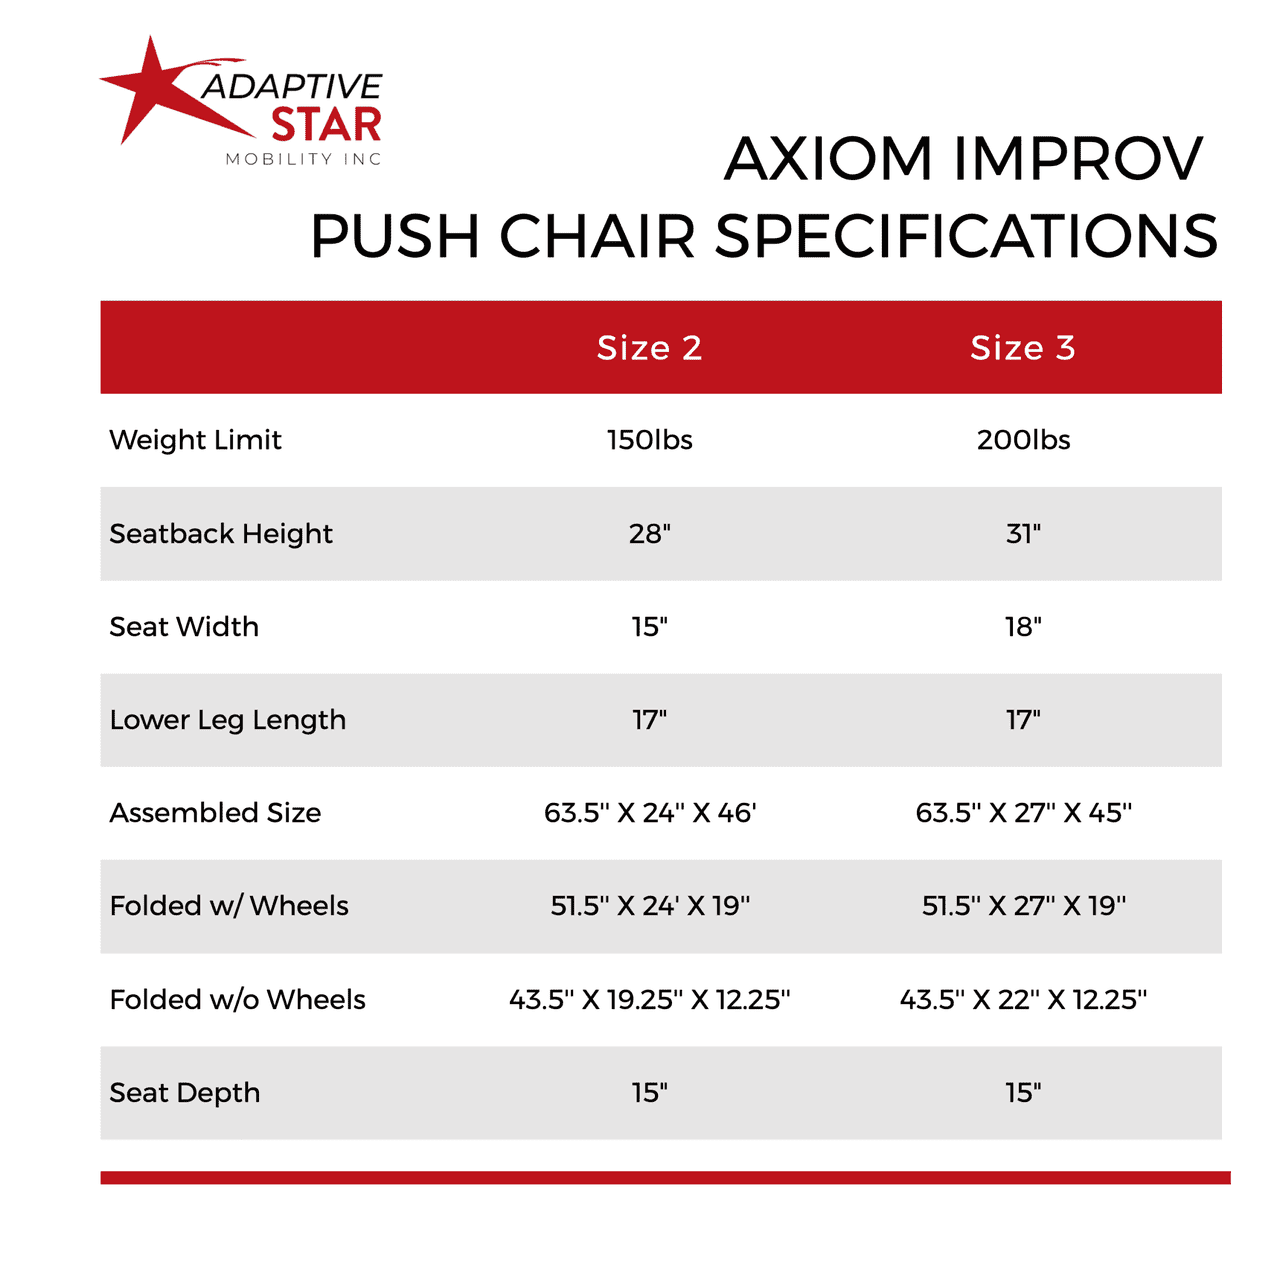 Adaptive Star Ai3N Axiom IMPROV 3 Indoor/Outdoor Mobility Push Chair, Navy